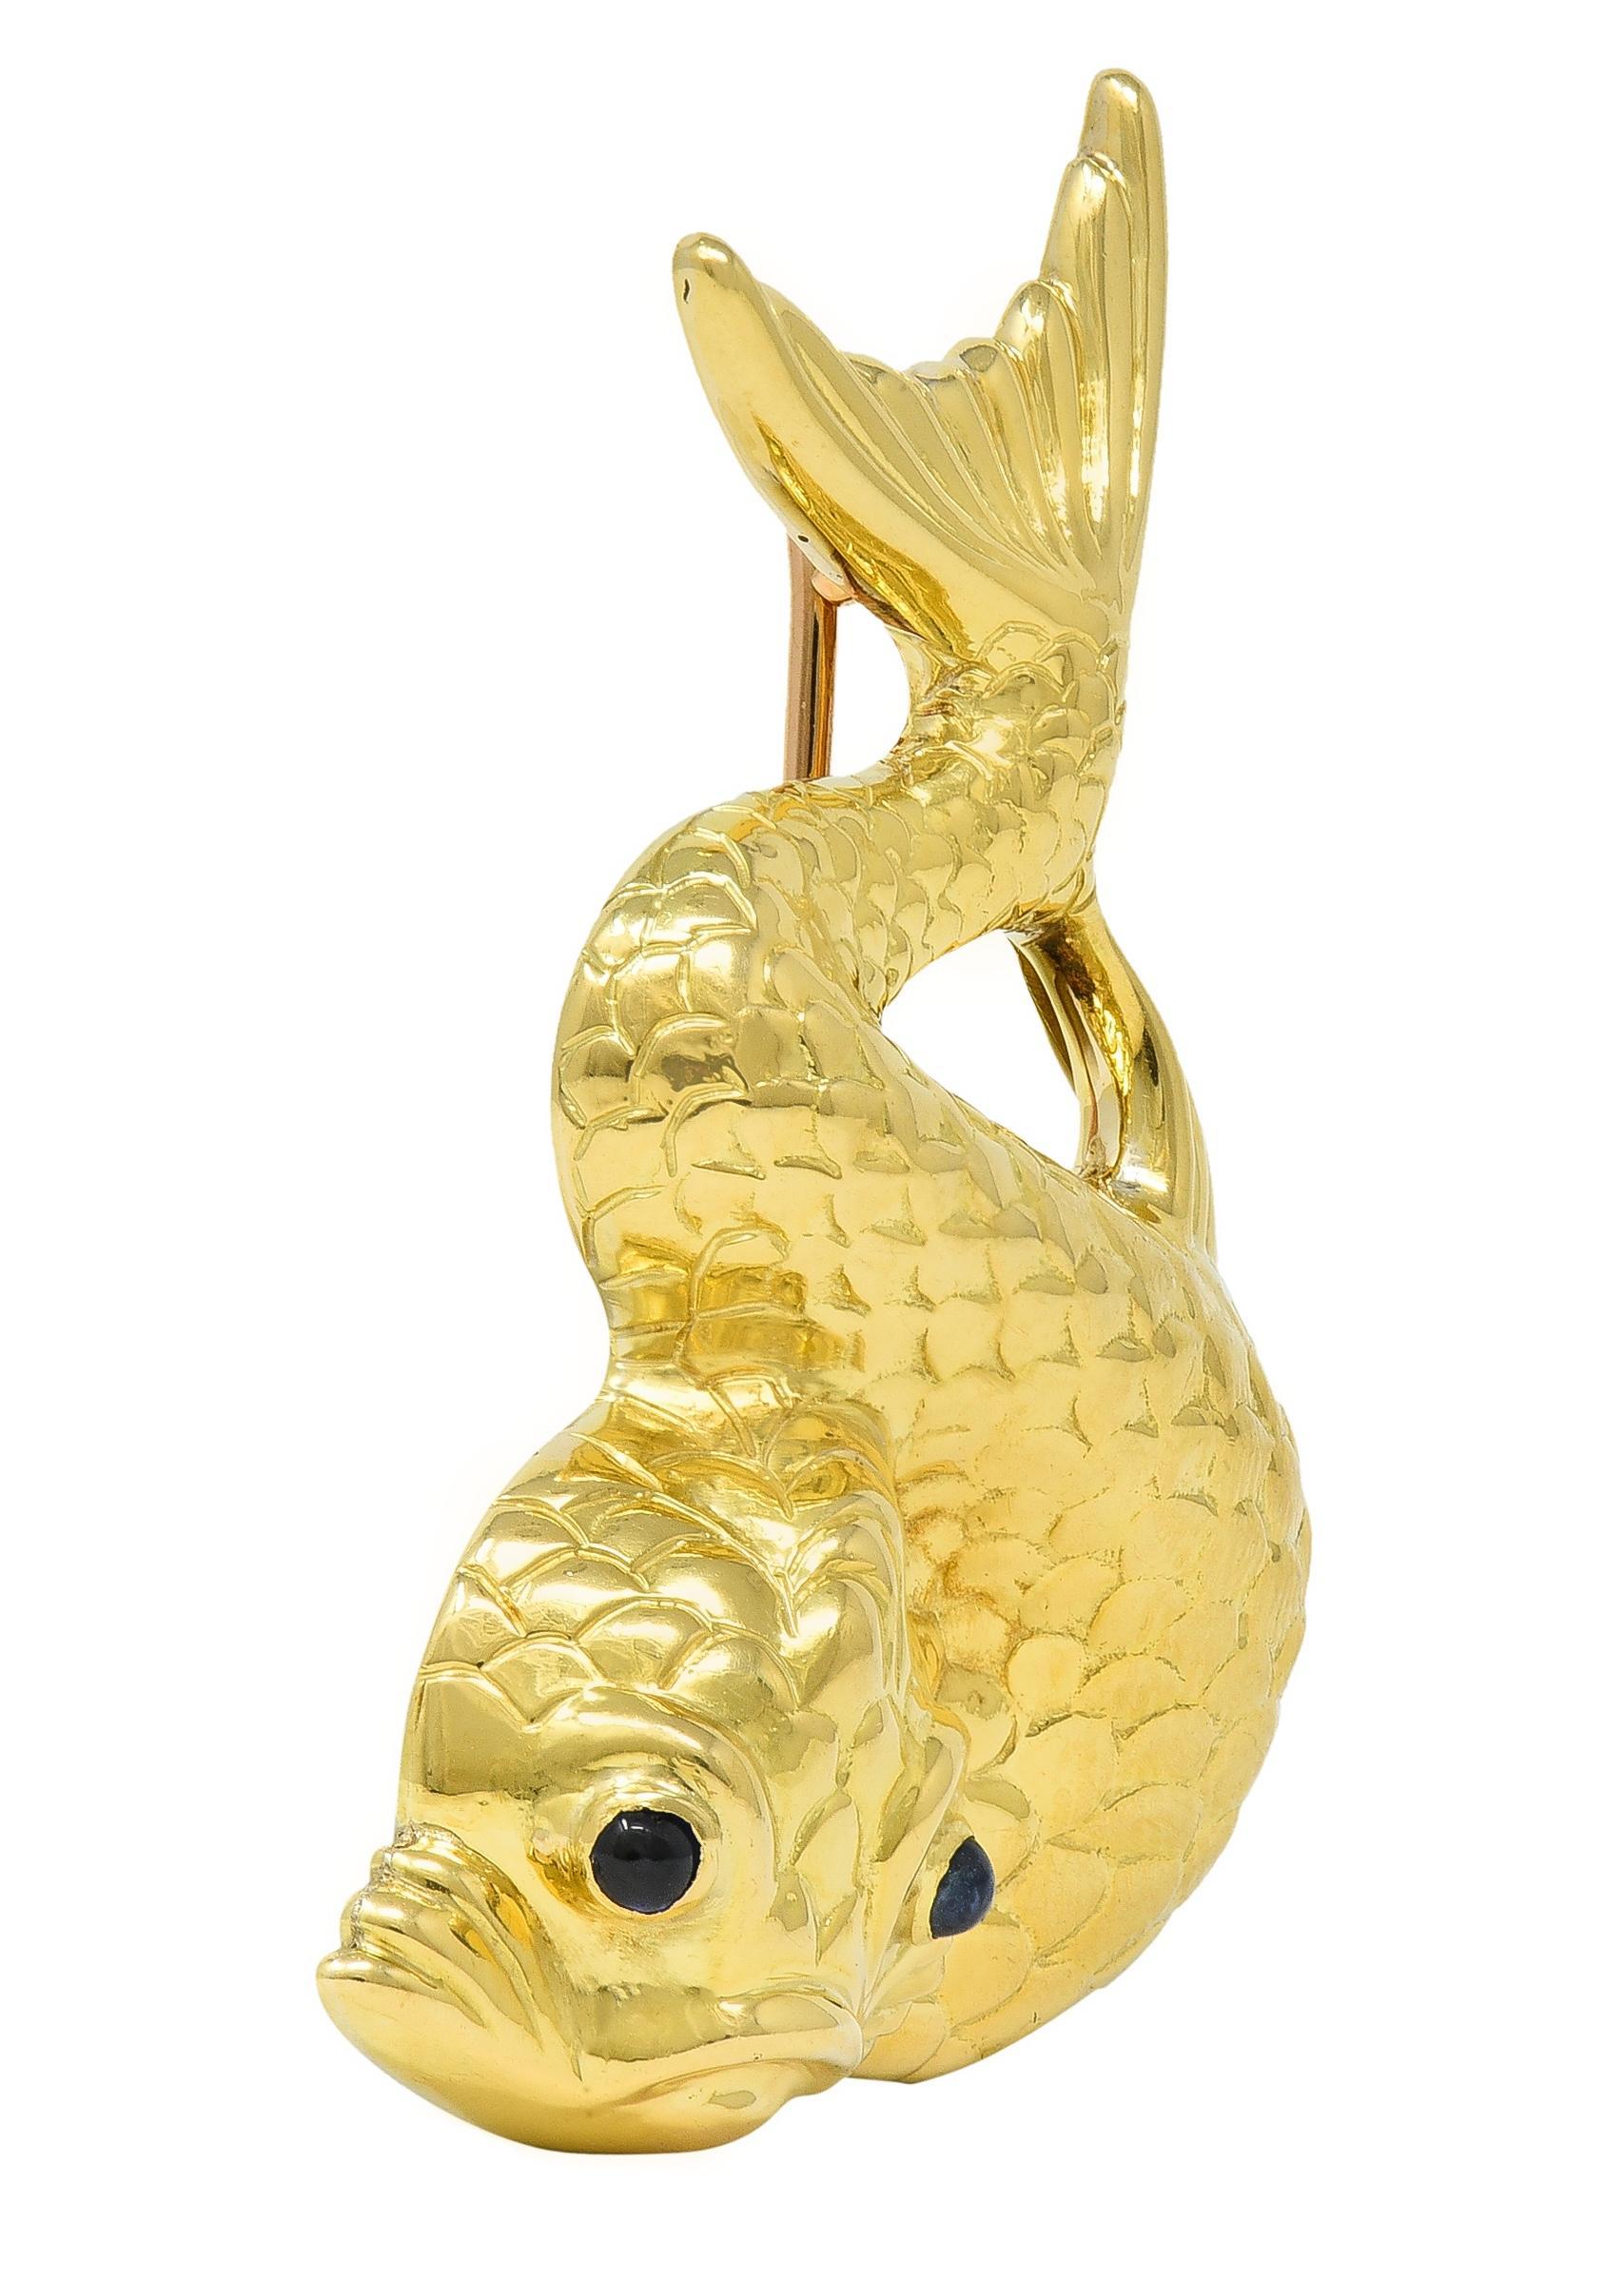 Designed a swirled koi fish with repoussé scaled body and fins 
Accented by 2.0 mm round sapphires - bezel set
Transparent medium blue in color
With high polish finish
Completed by hinged pinstem with locking closure
Stamped for 18 karat gold
Fully